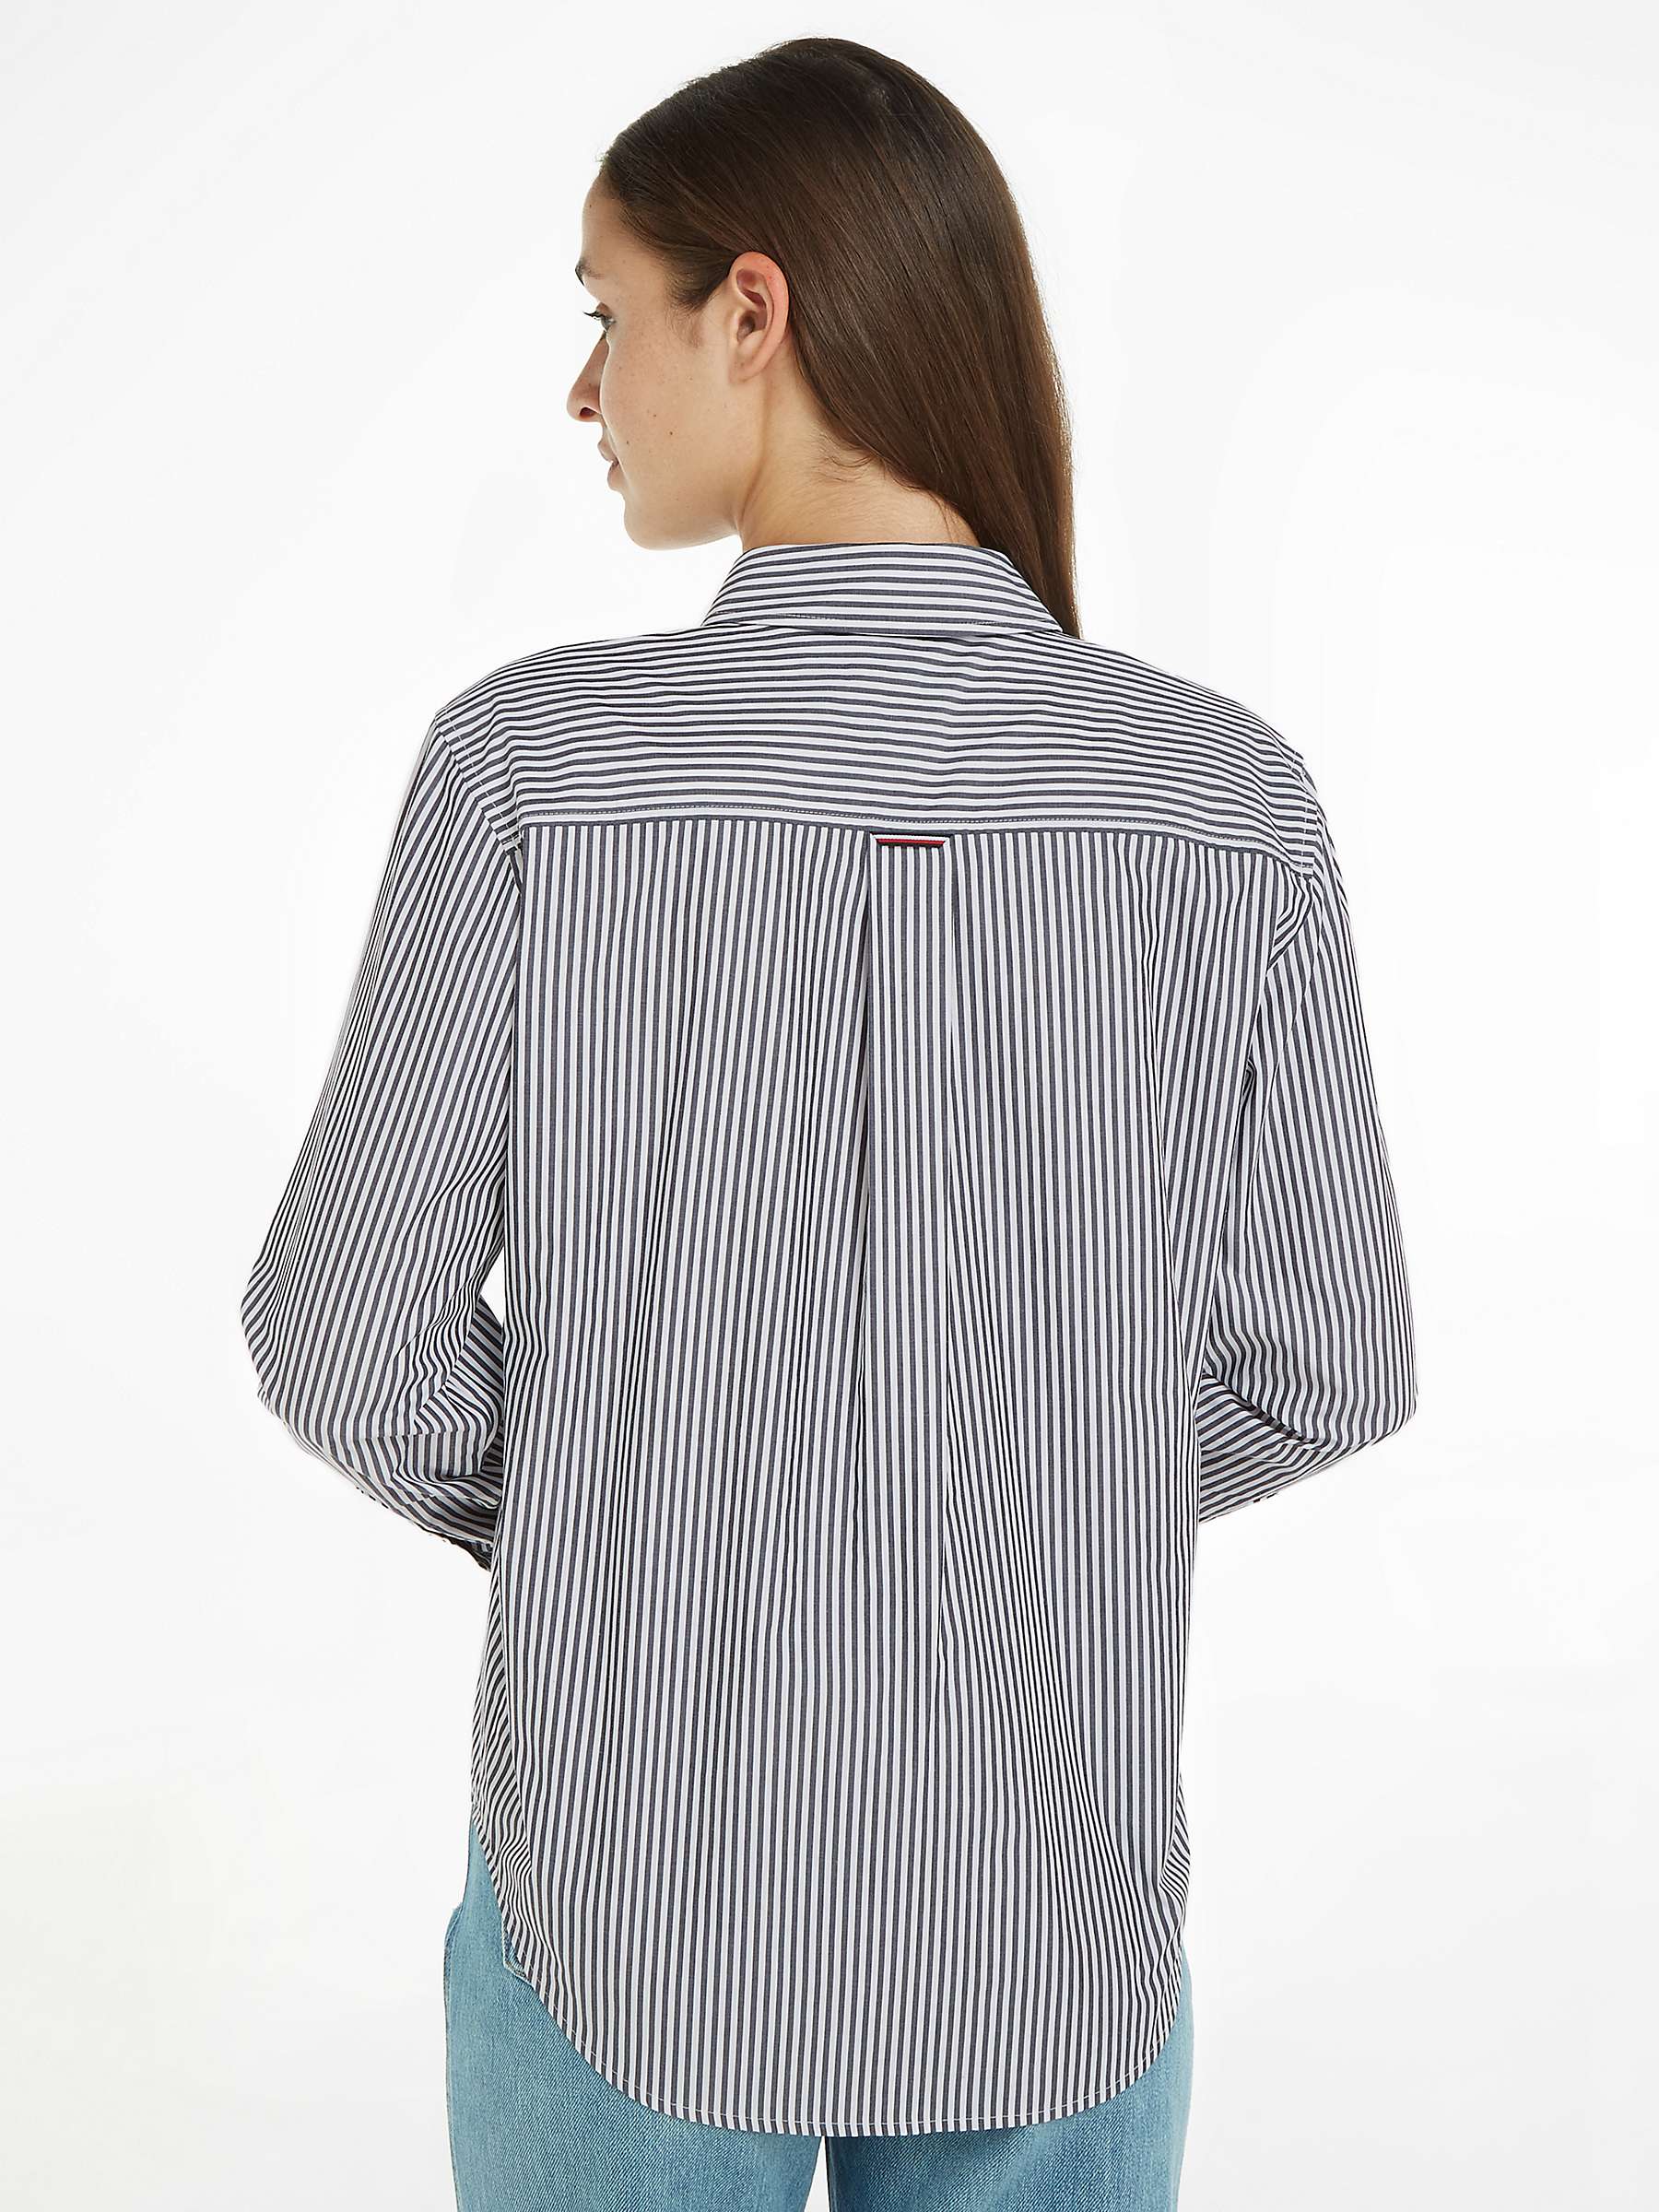 Buy Tommy Hilfiger Relaxed Stripe Shirt Online at johnlewis.com